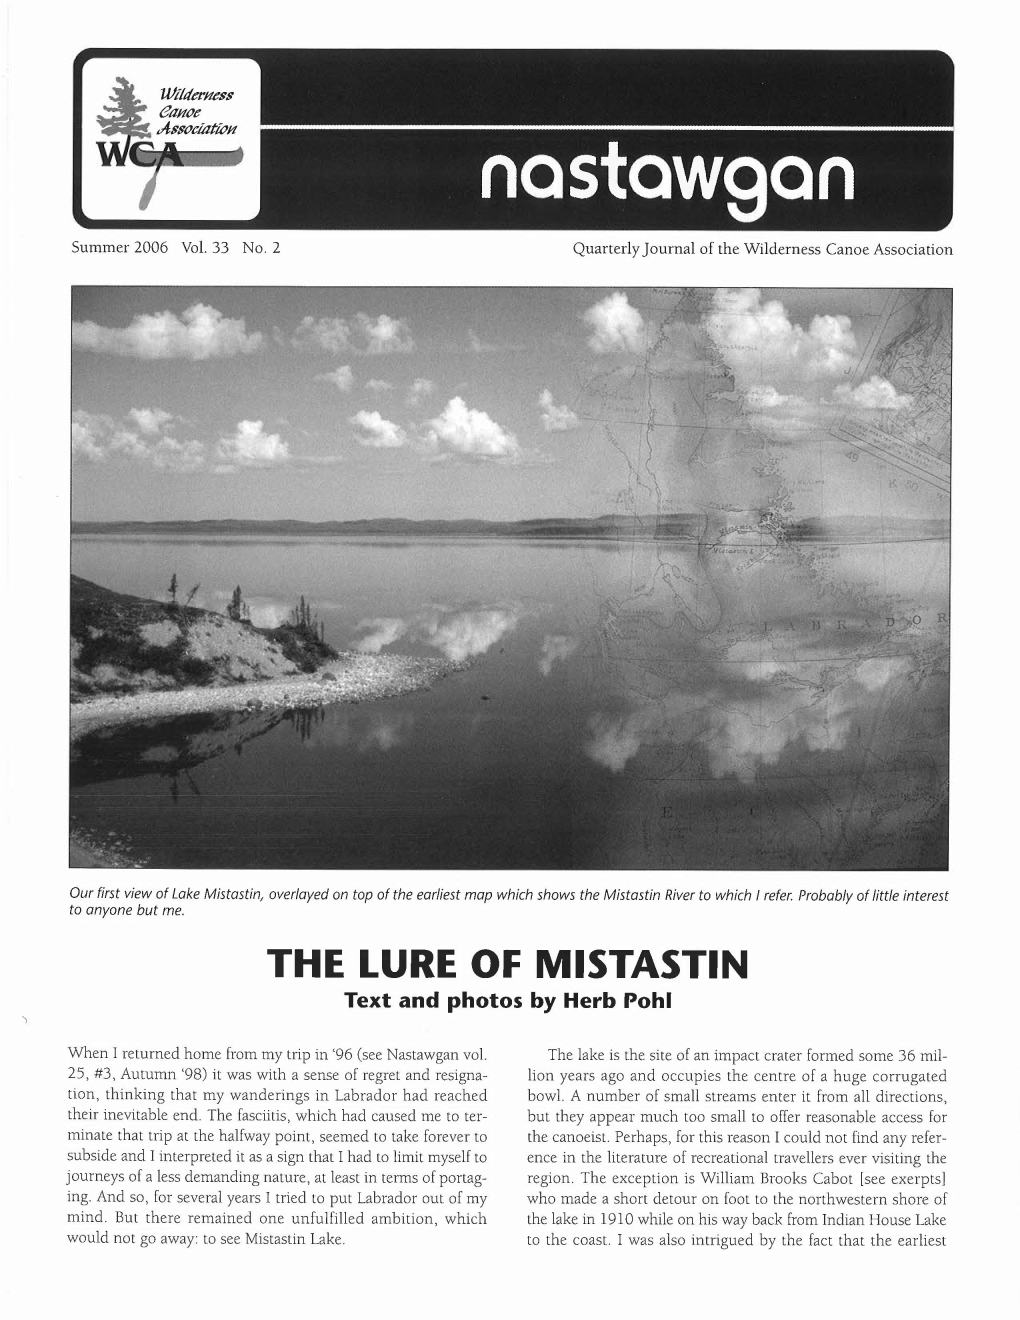 THE LURE of MISTASTIN Text and Photos by Herb Pohl